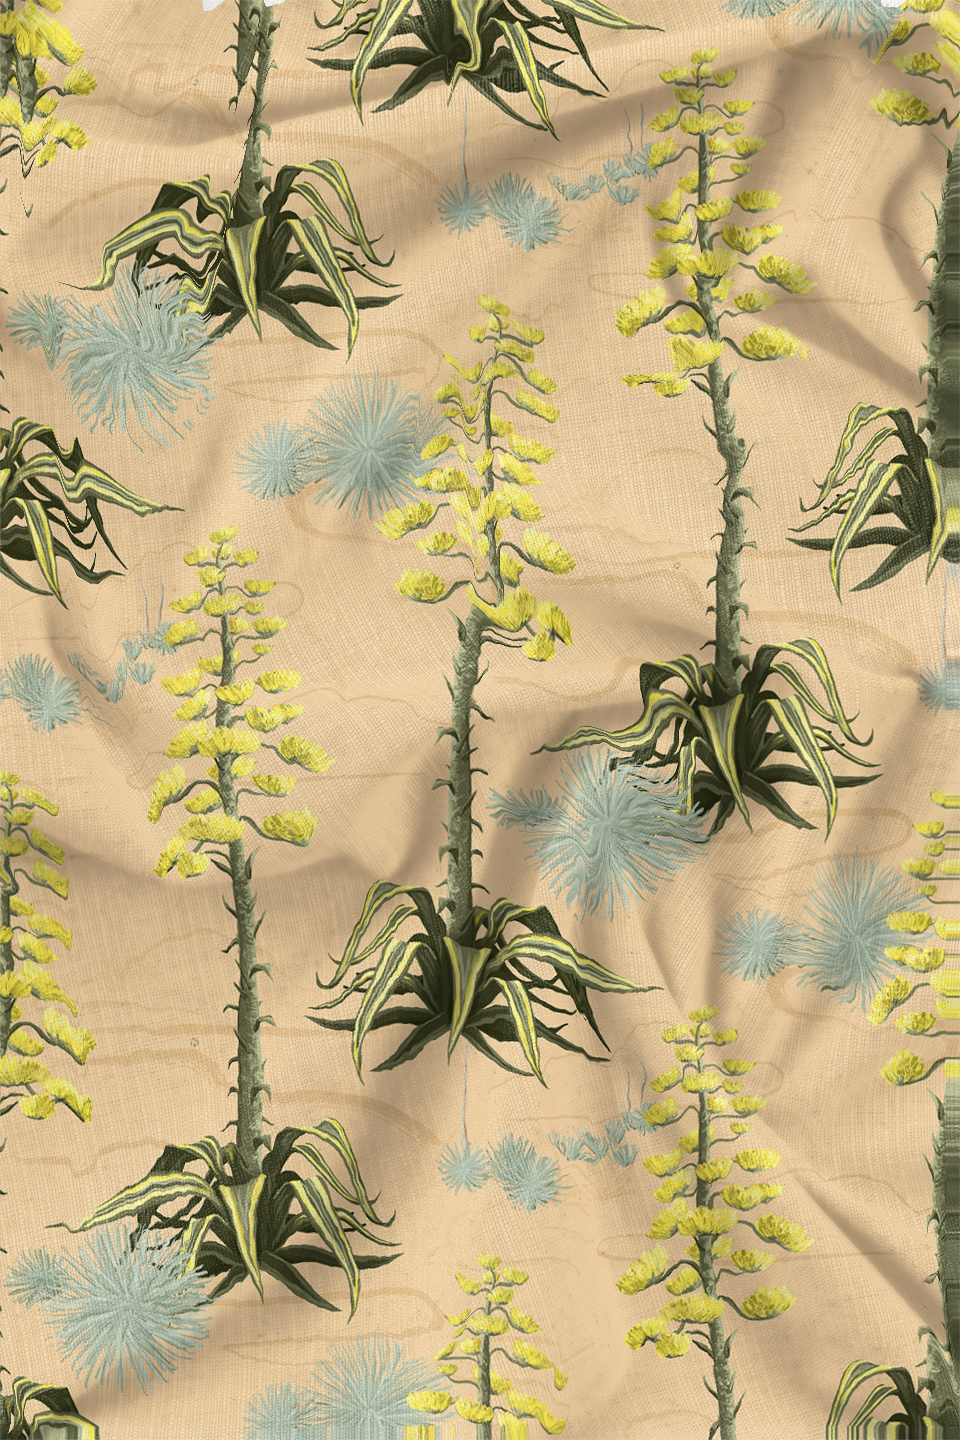 Agave_Fabric Rendering for website_peach.png